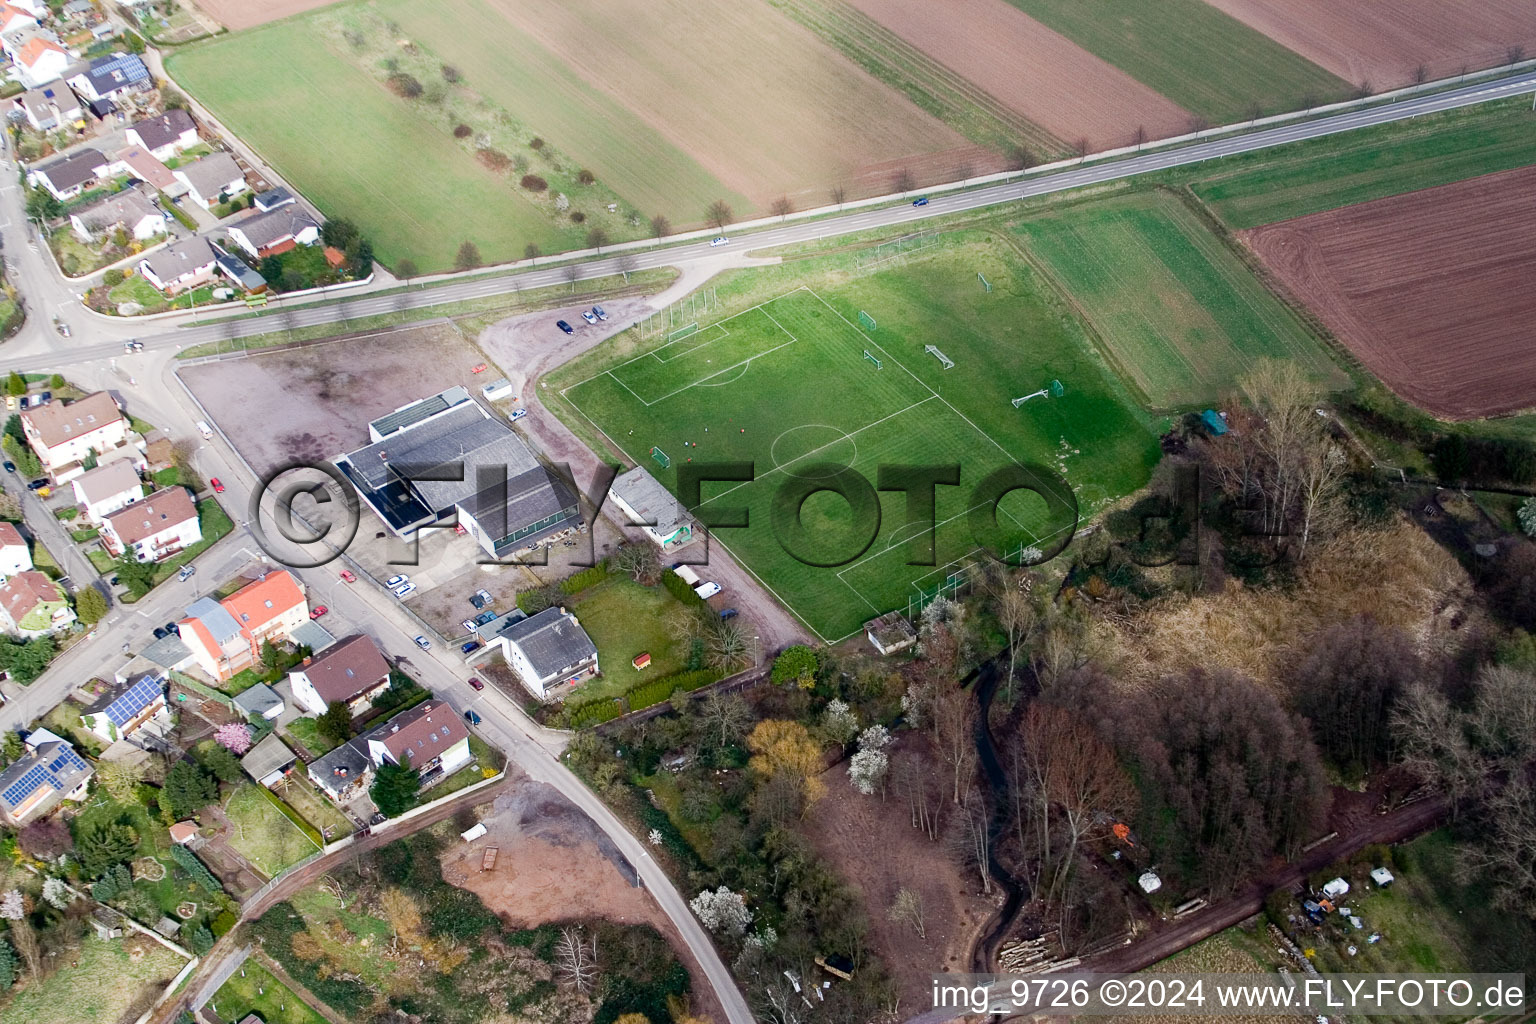 Drone image of Offenbach an der Queich in the state Rhineland-Palatinate, Germany